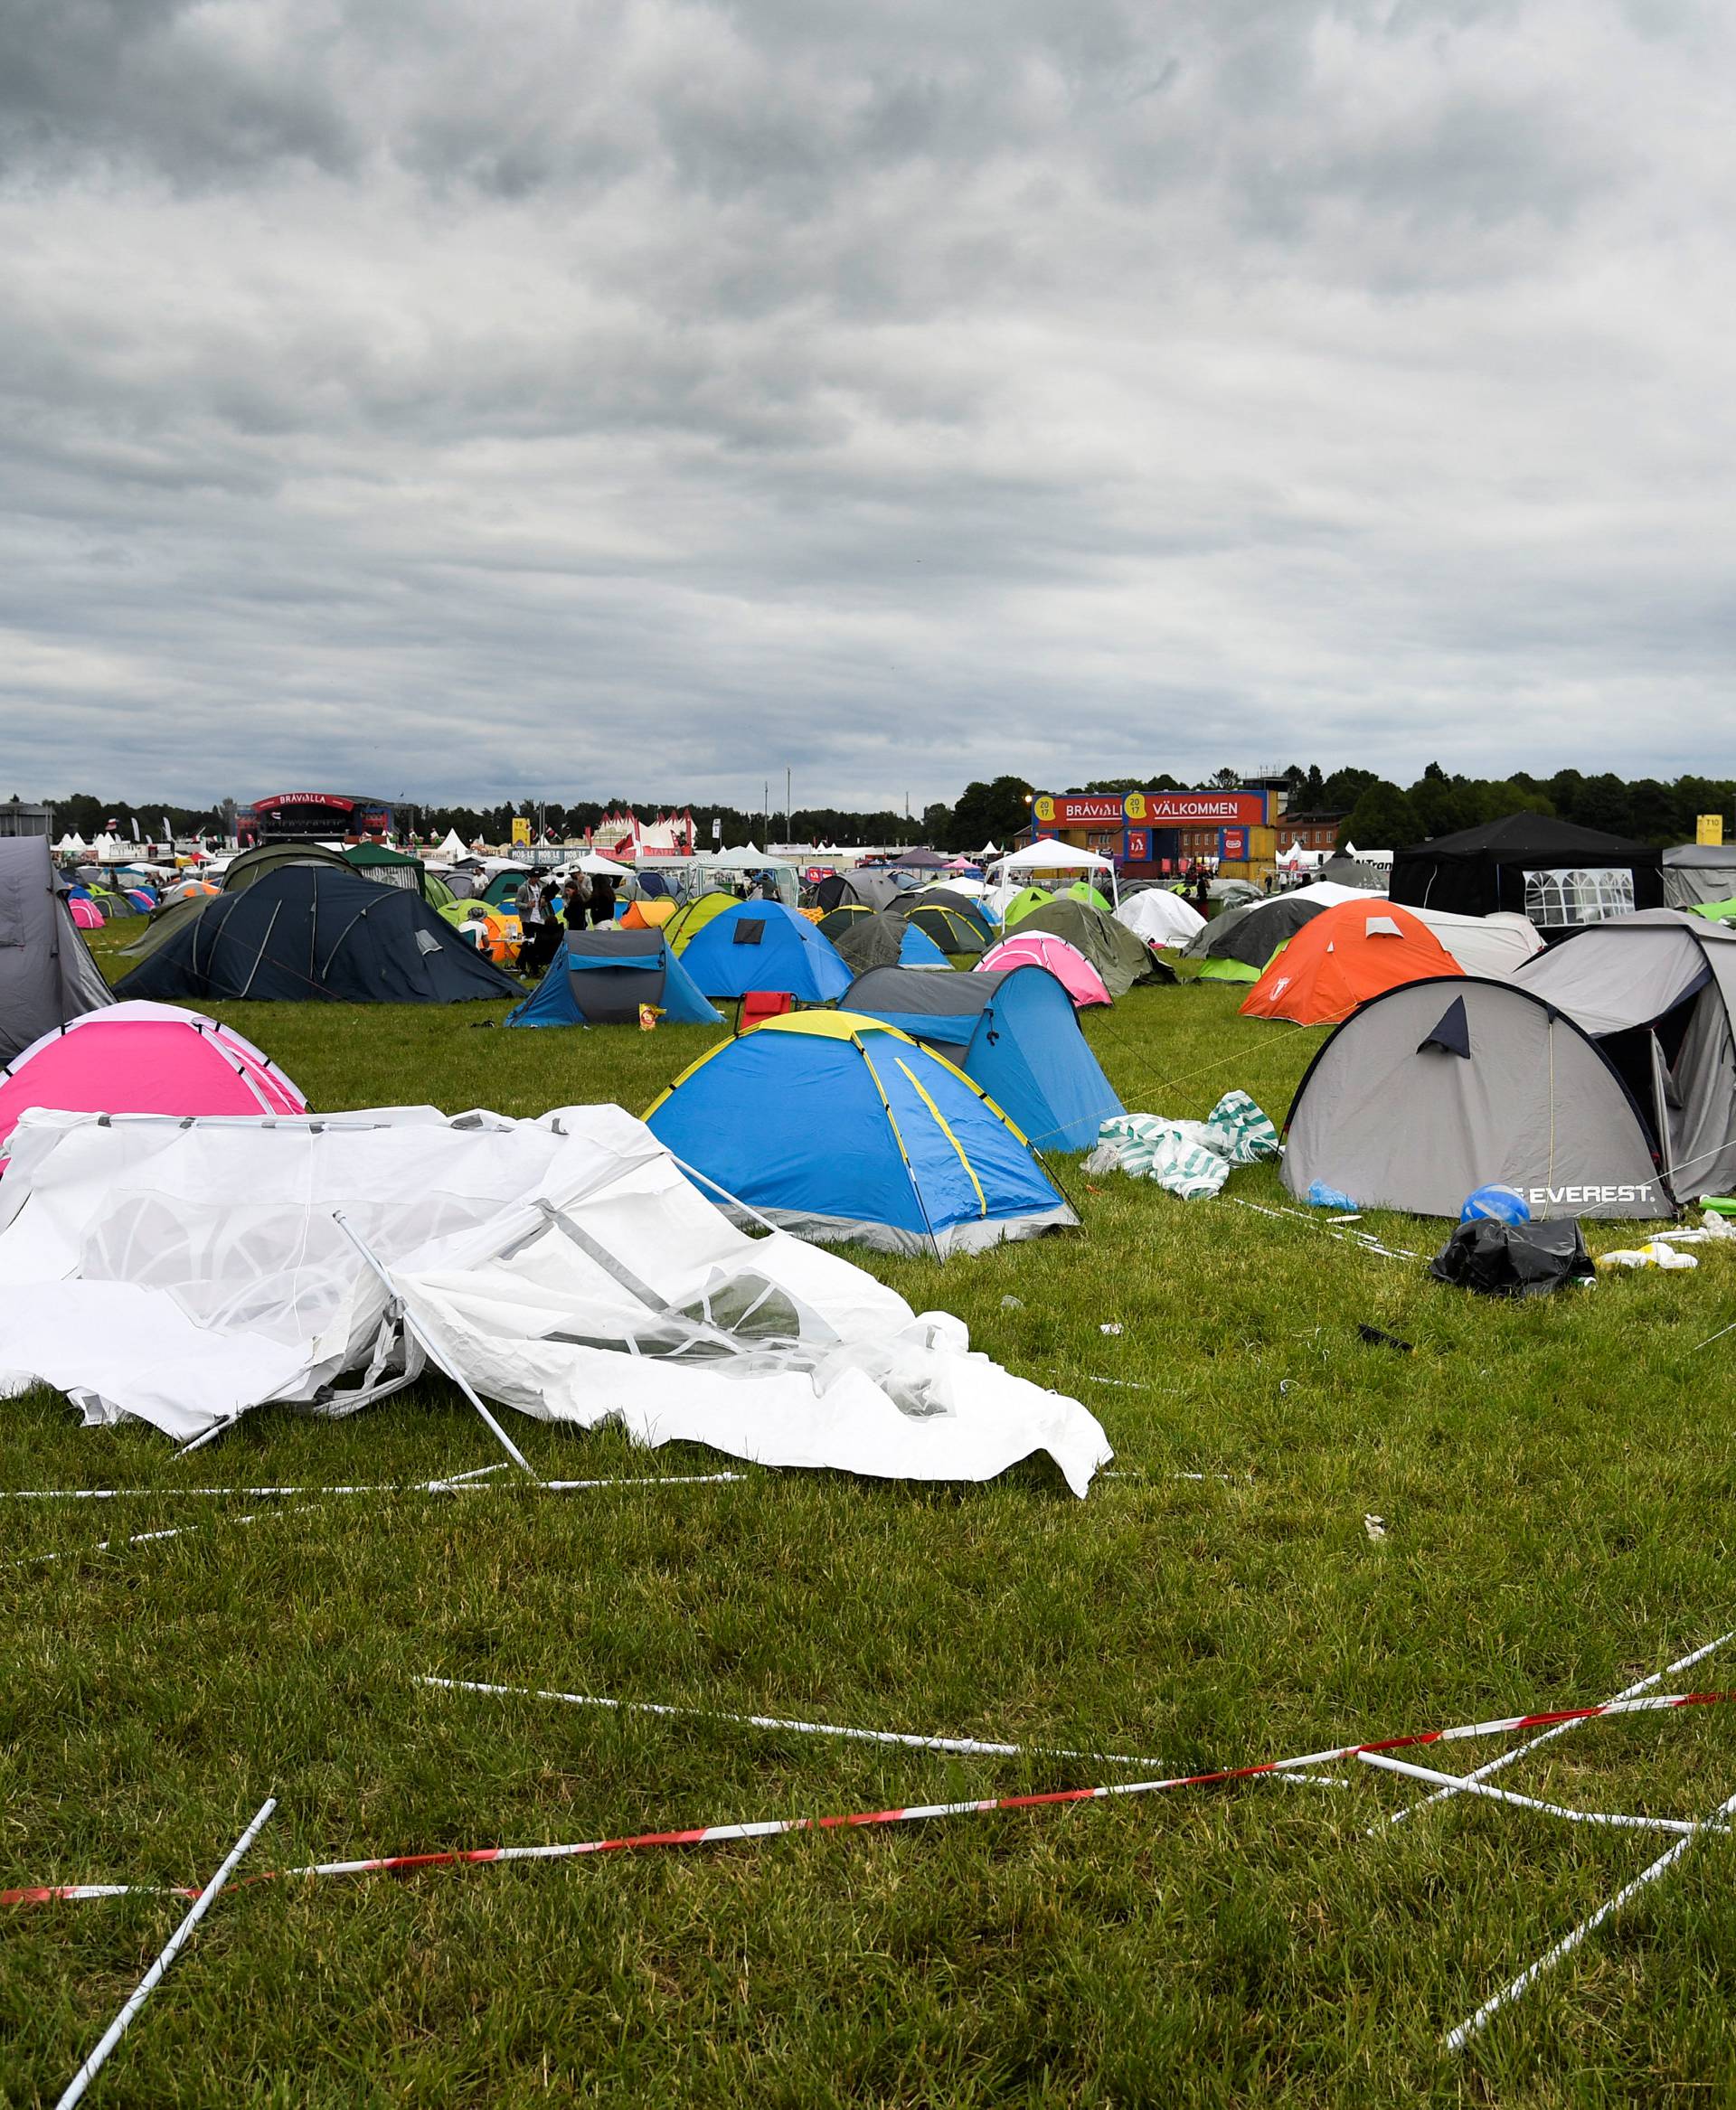 The camping site of the Bravalla festival is pictured on its last day, in Norrkoping